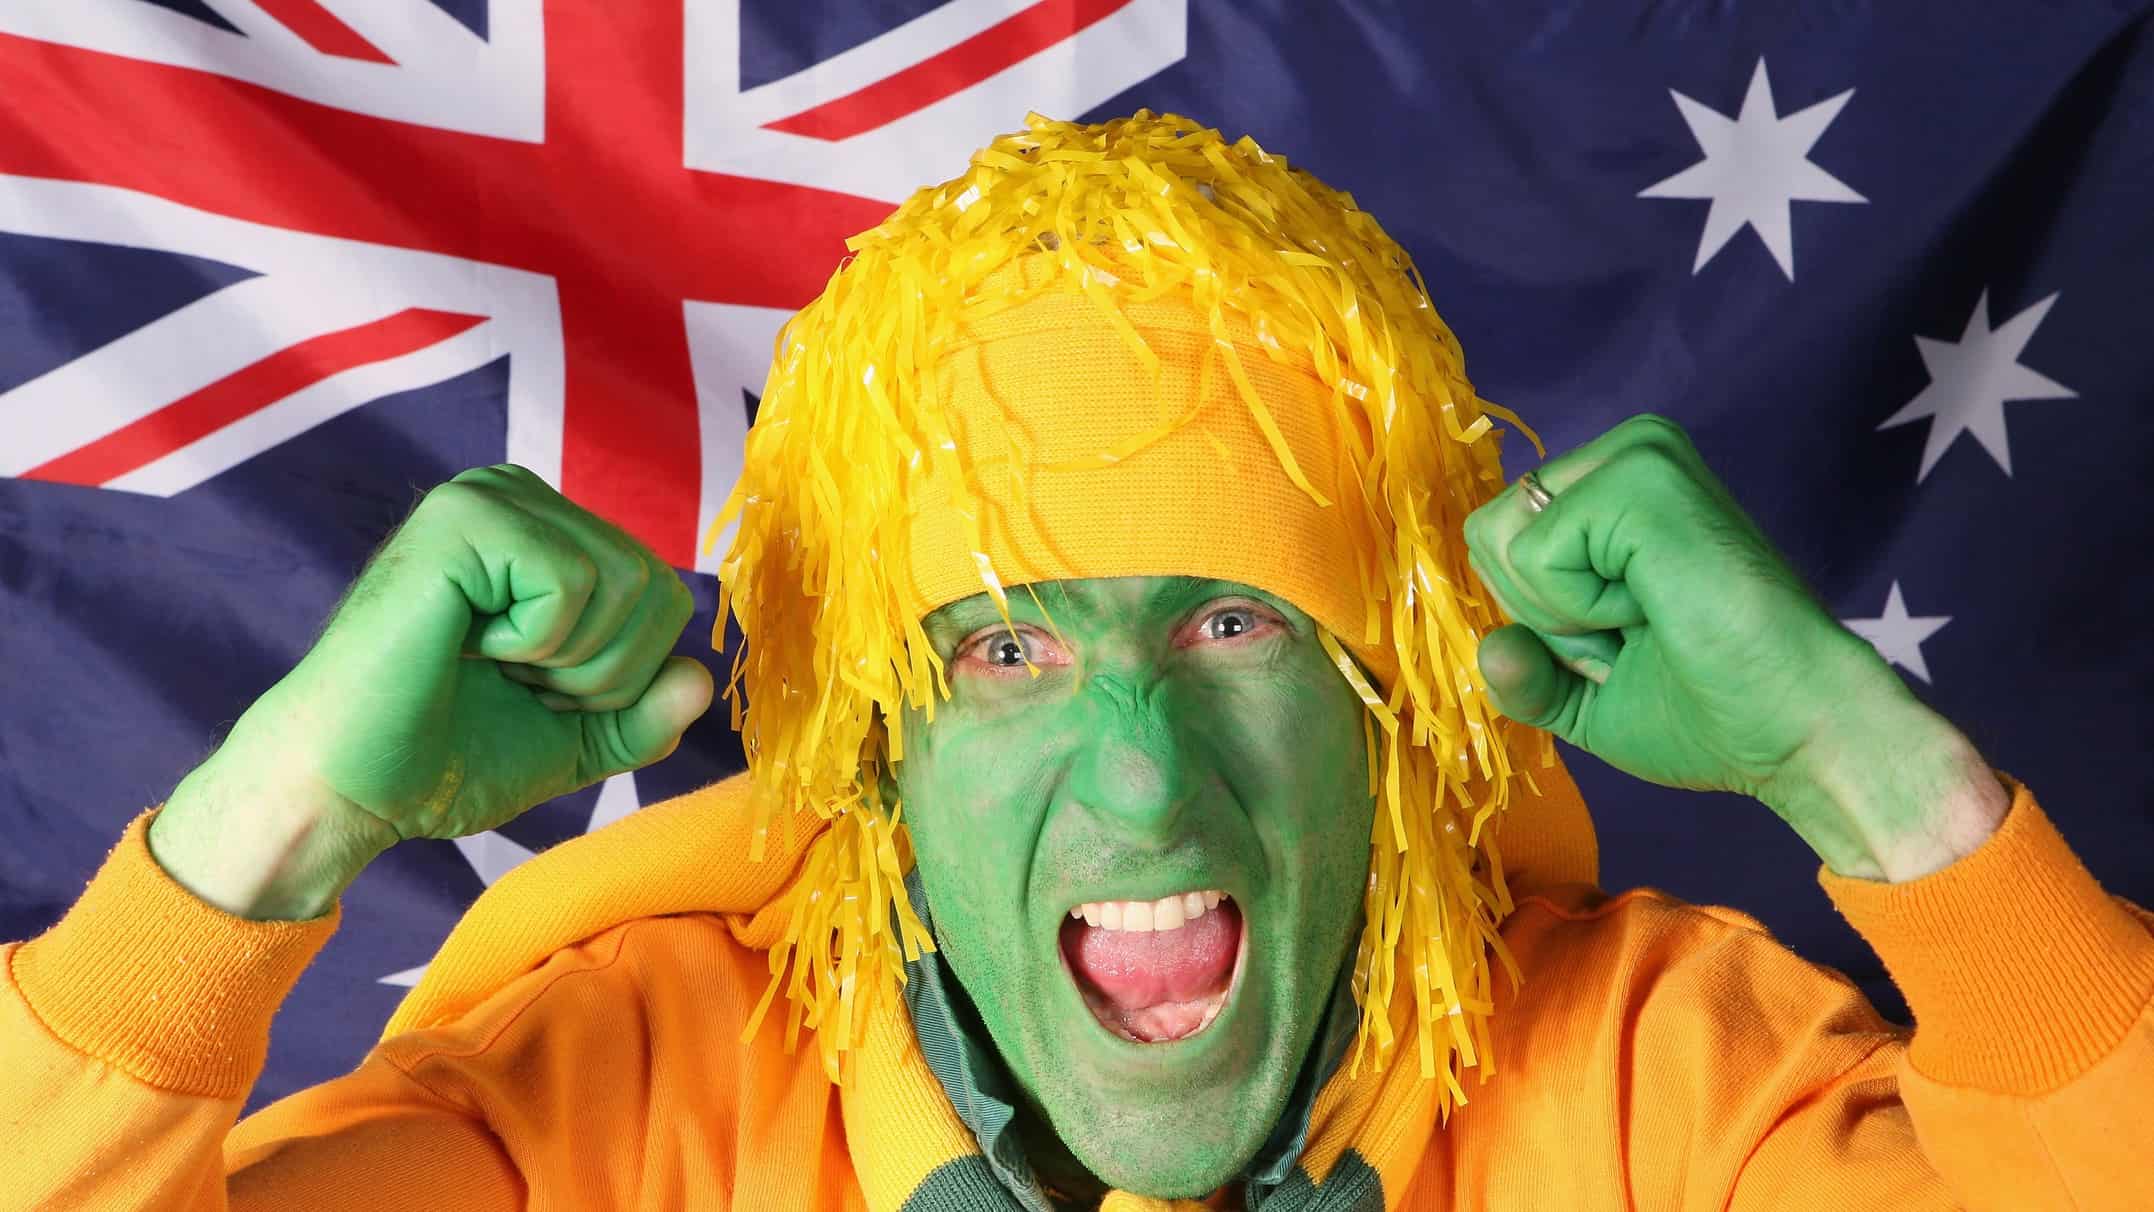 Man in green face paint and yellow wig/hat cheers in front of an Australian flag.